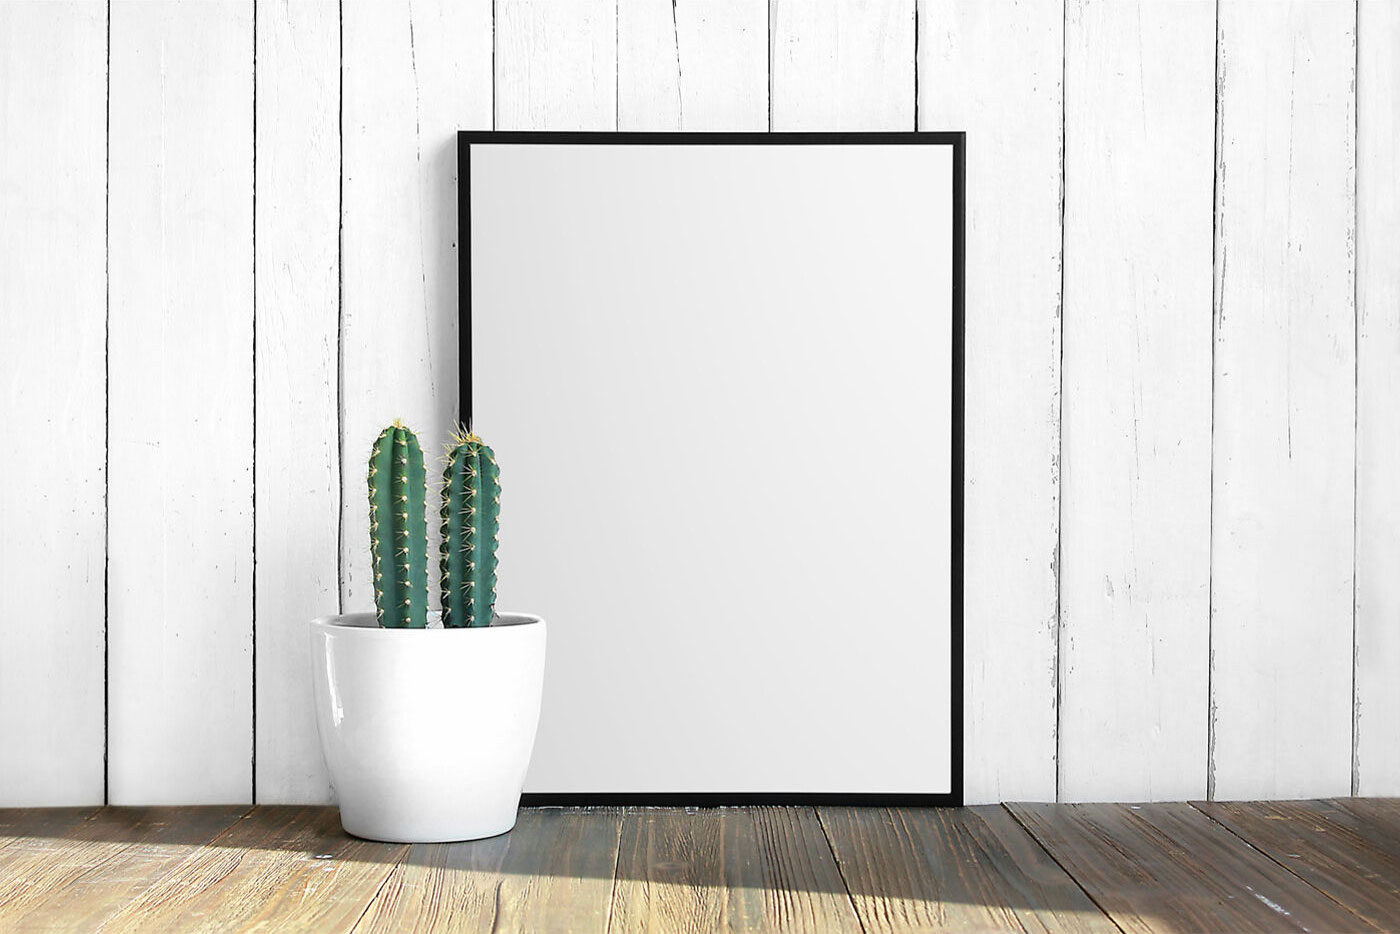 Poster with Cactus Mockup on Wooden Board FREE PSD